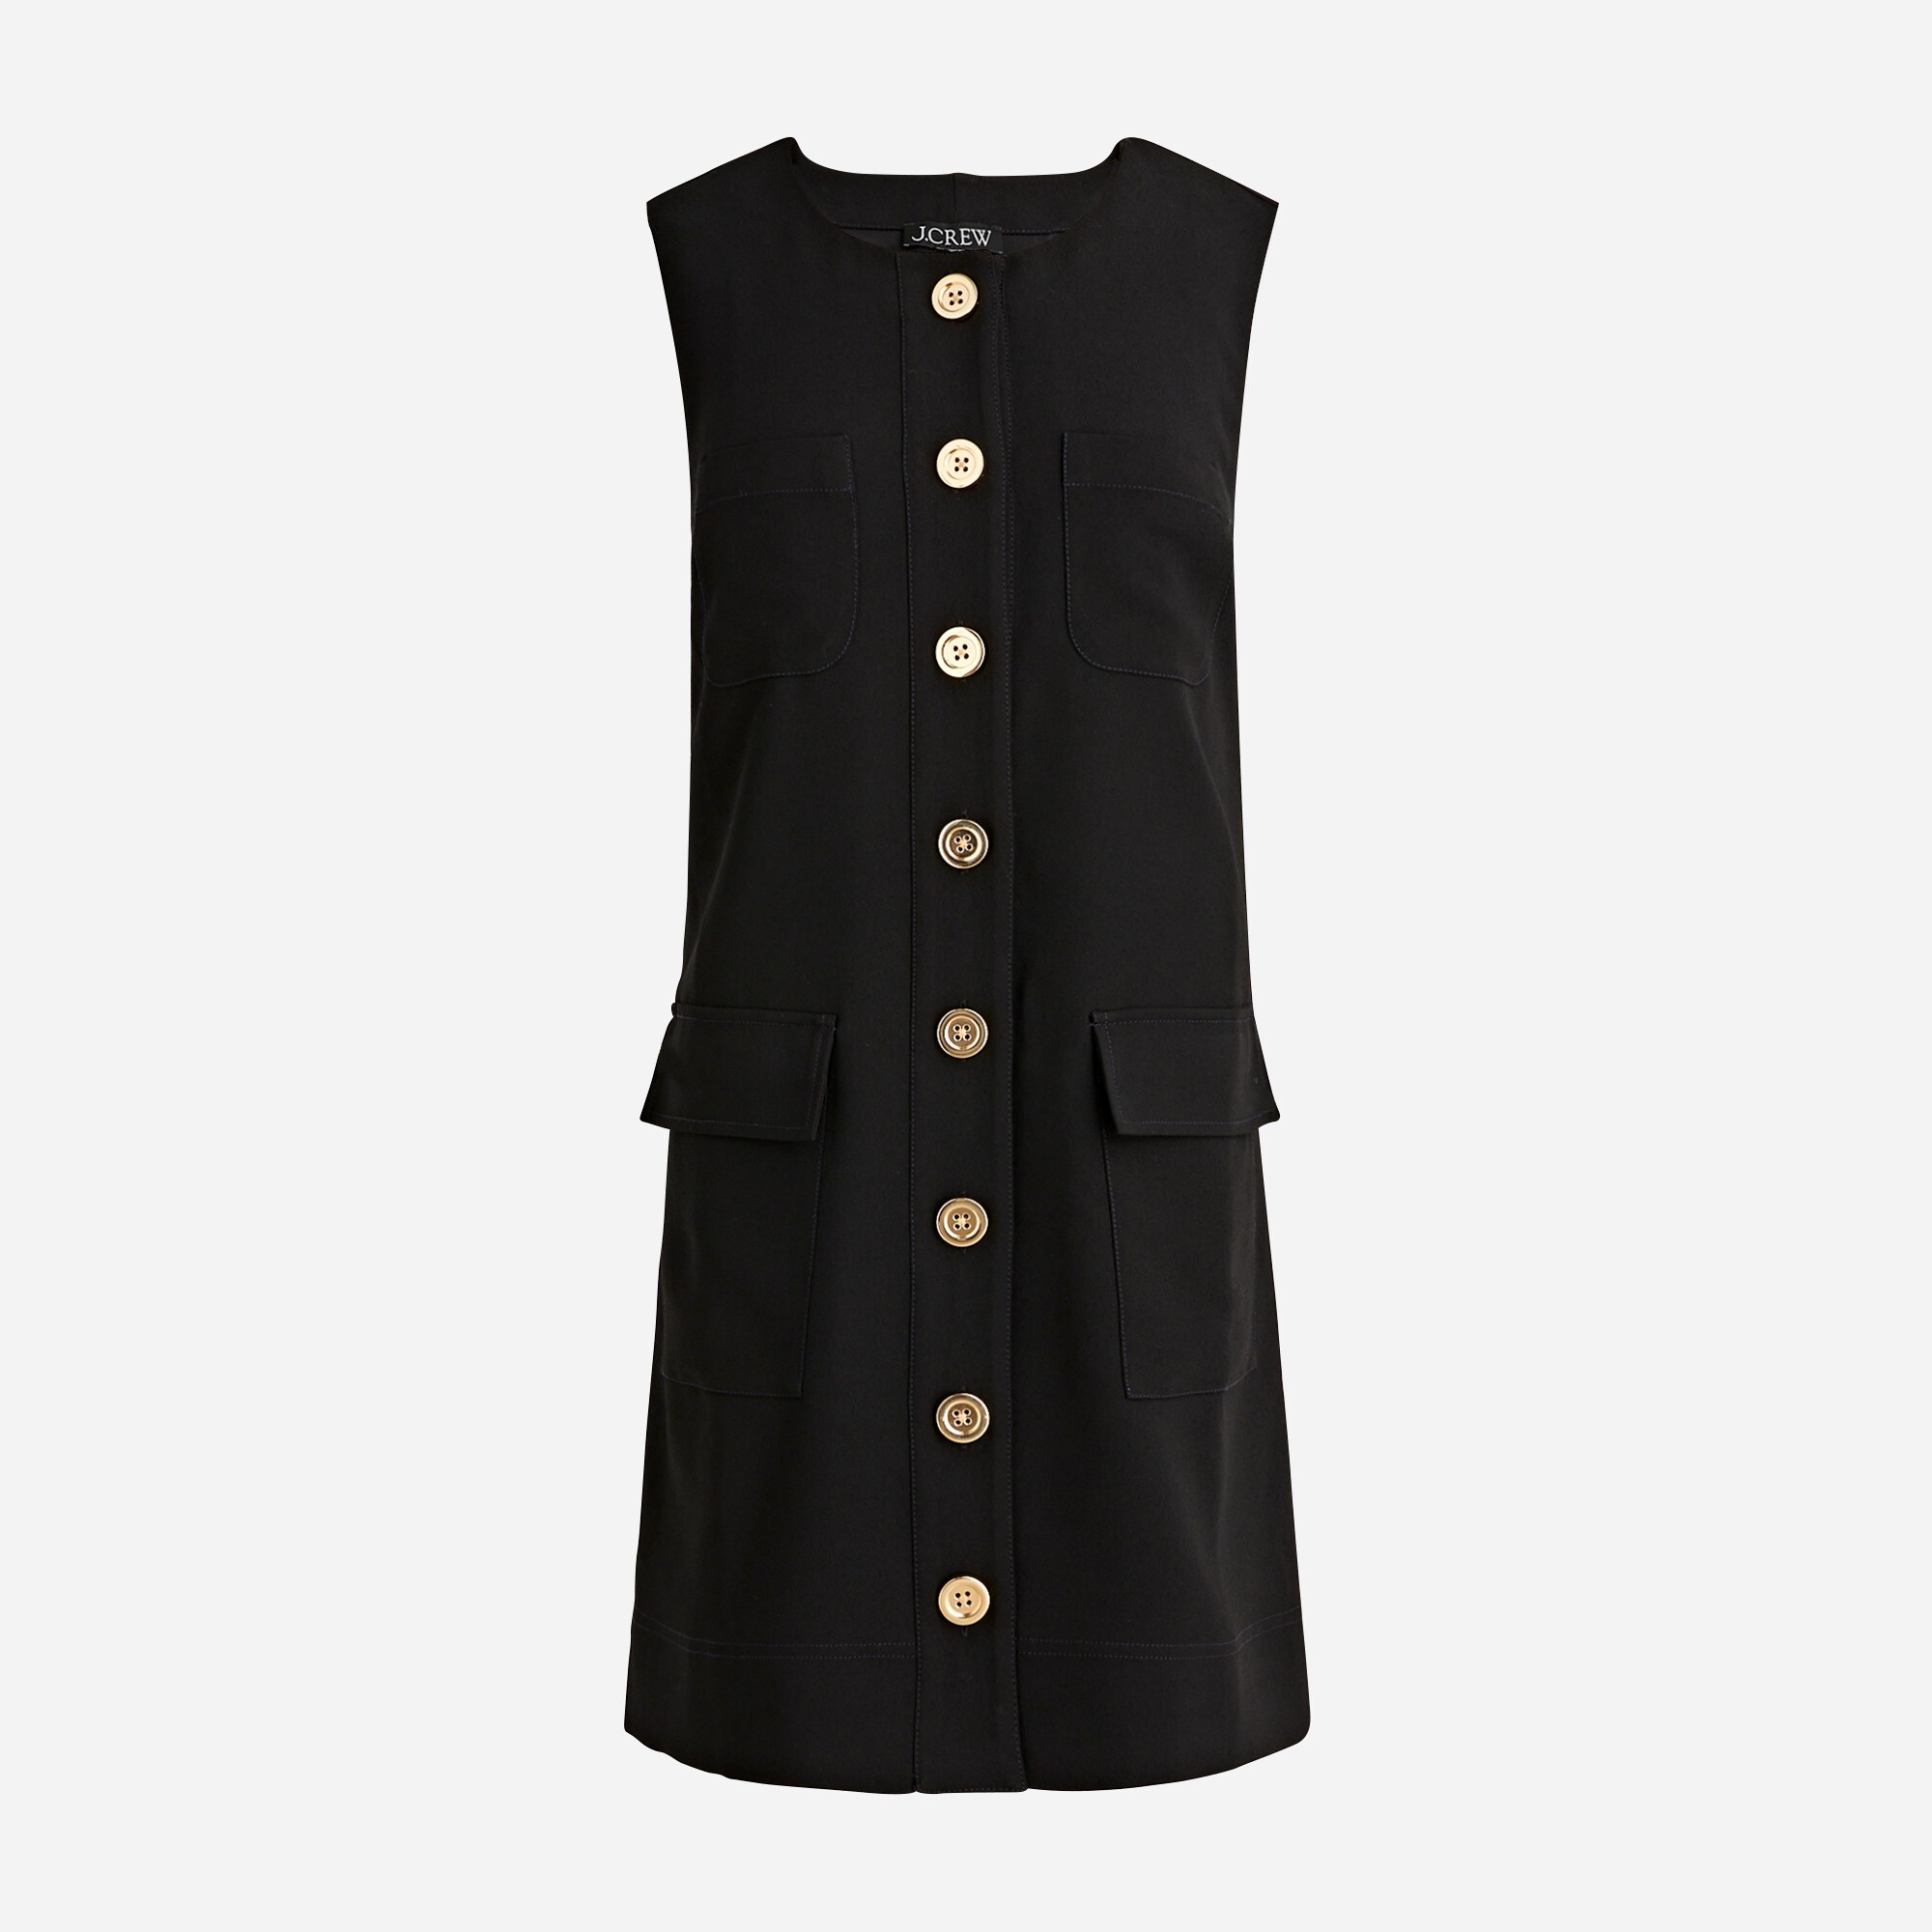  Button-front shift dress in drapey crepe